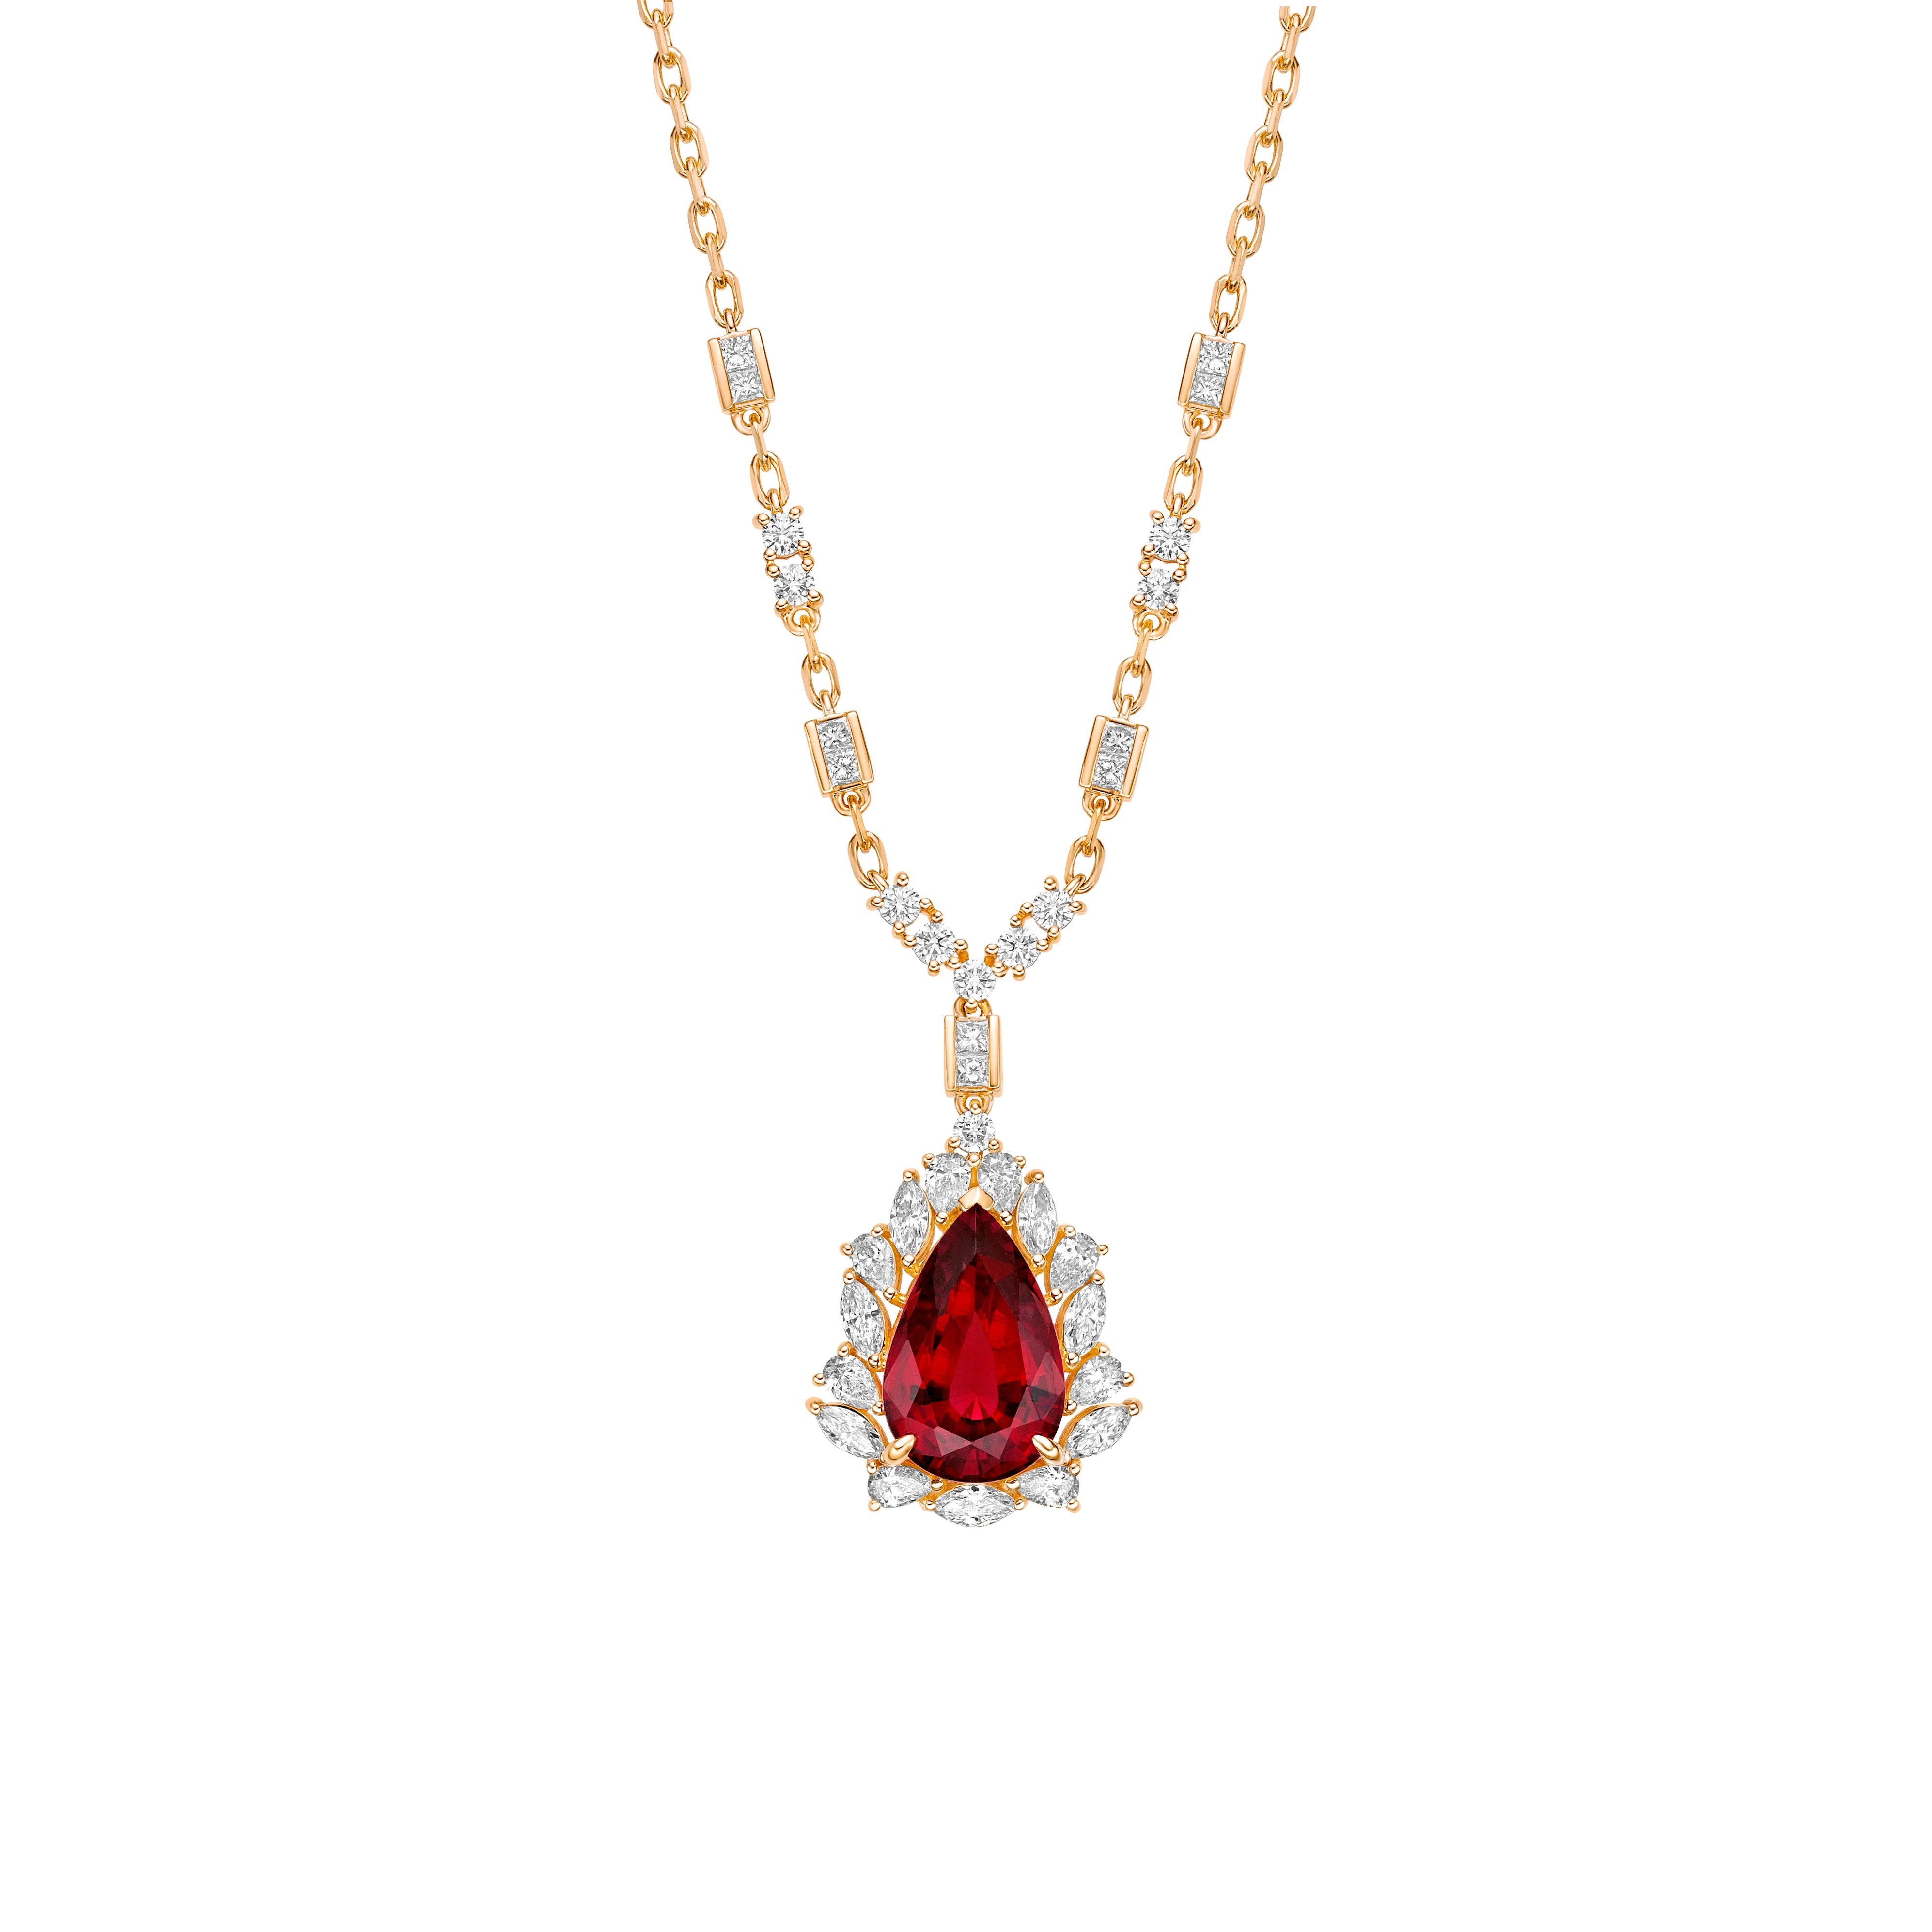 Pear Cut 8.047 Carat Rubellite Necklace in 18Karat Yellow Gold with White Diamond. For Sale